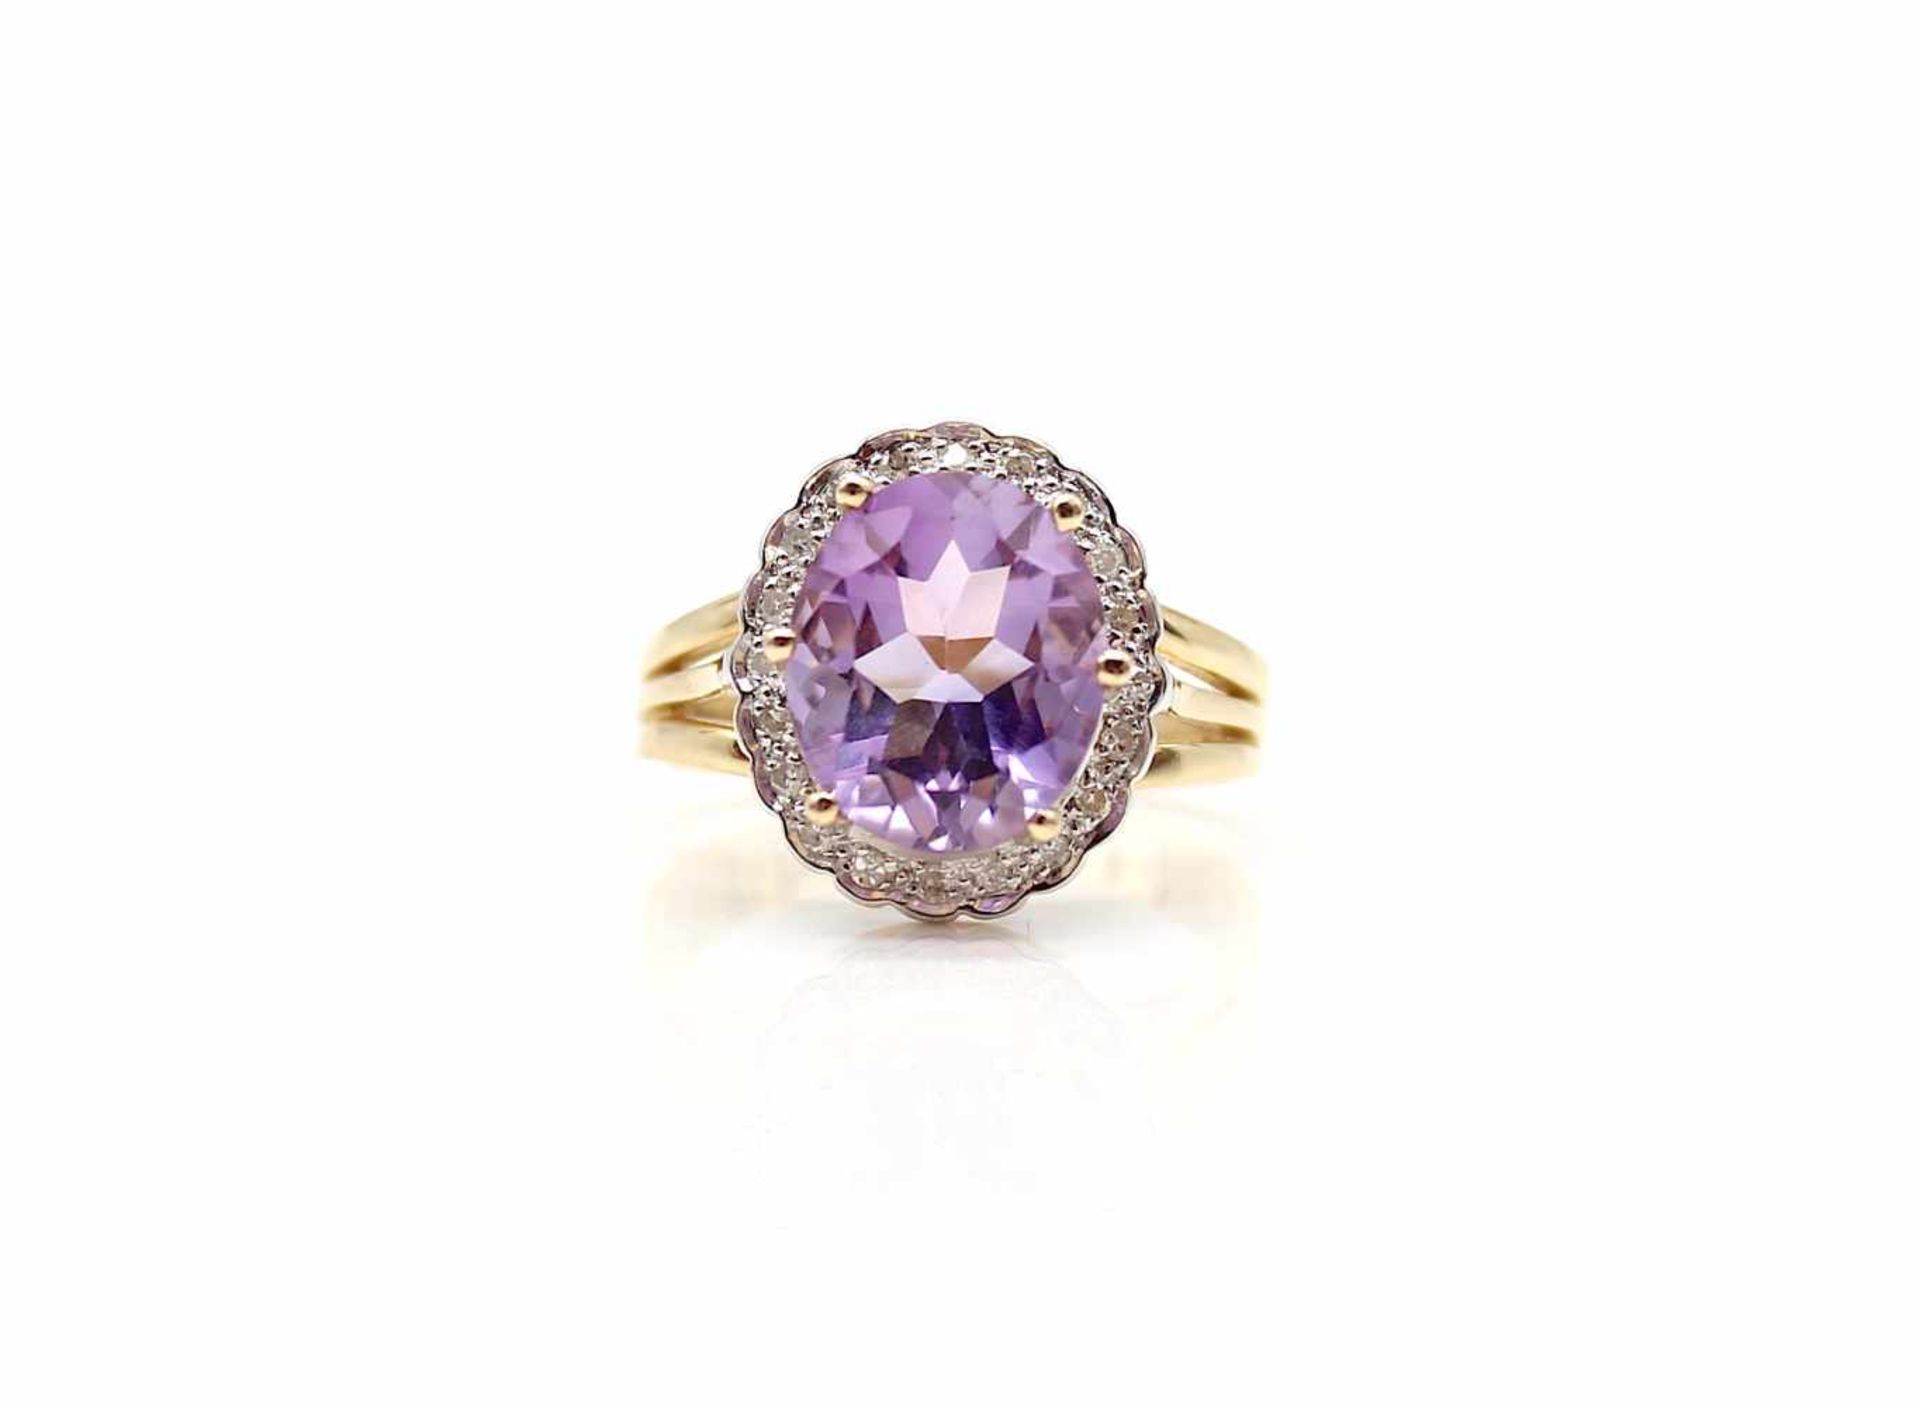 Ring of 585 gold with an amethyst and 20 diamonds, total approx. 0.15 ct.Weight 5.8 g, size 60- - - - Bild 2 aus 3